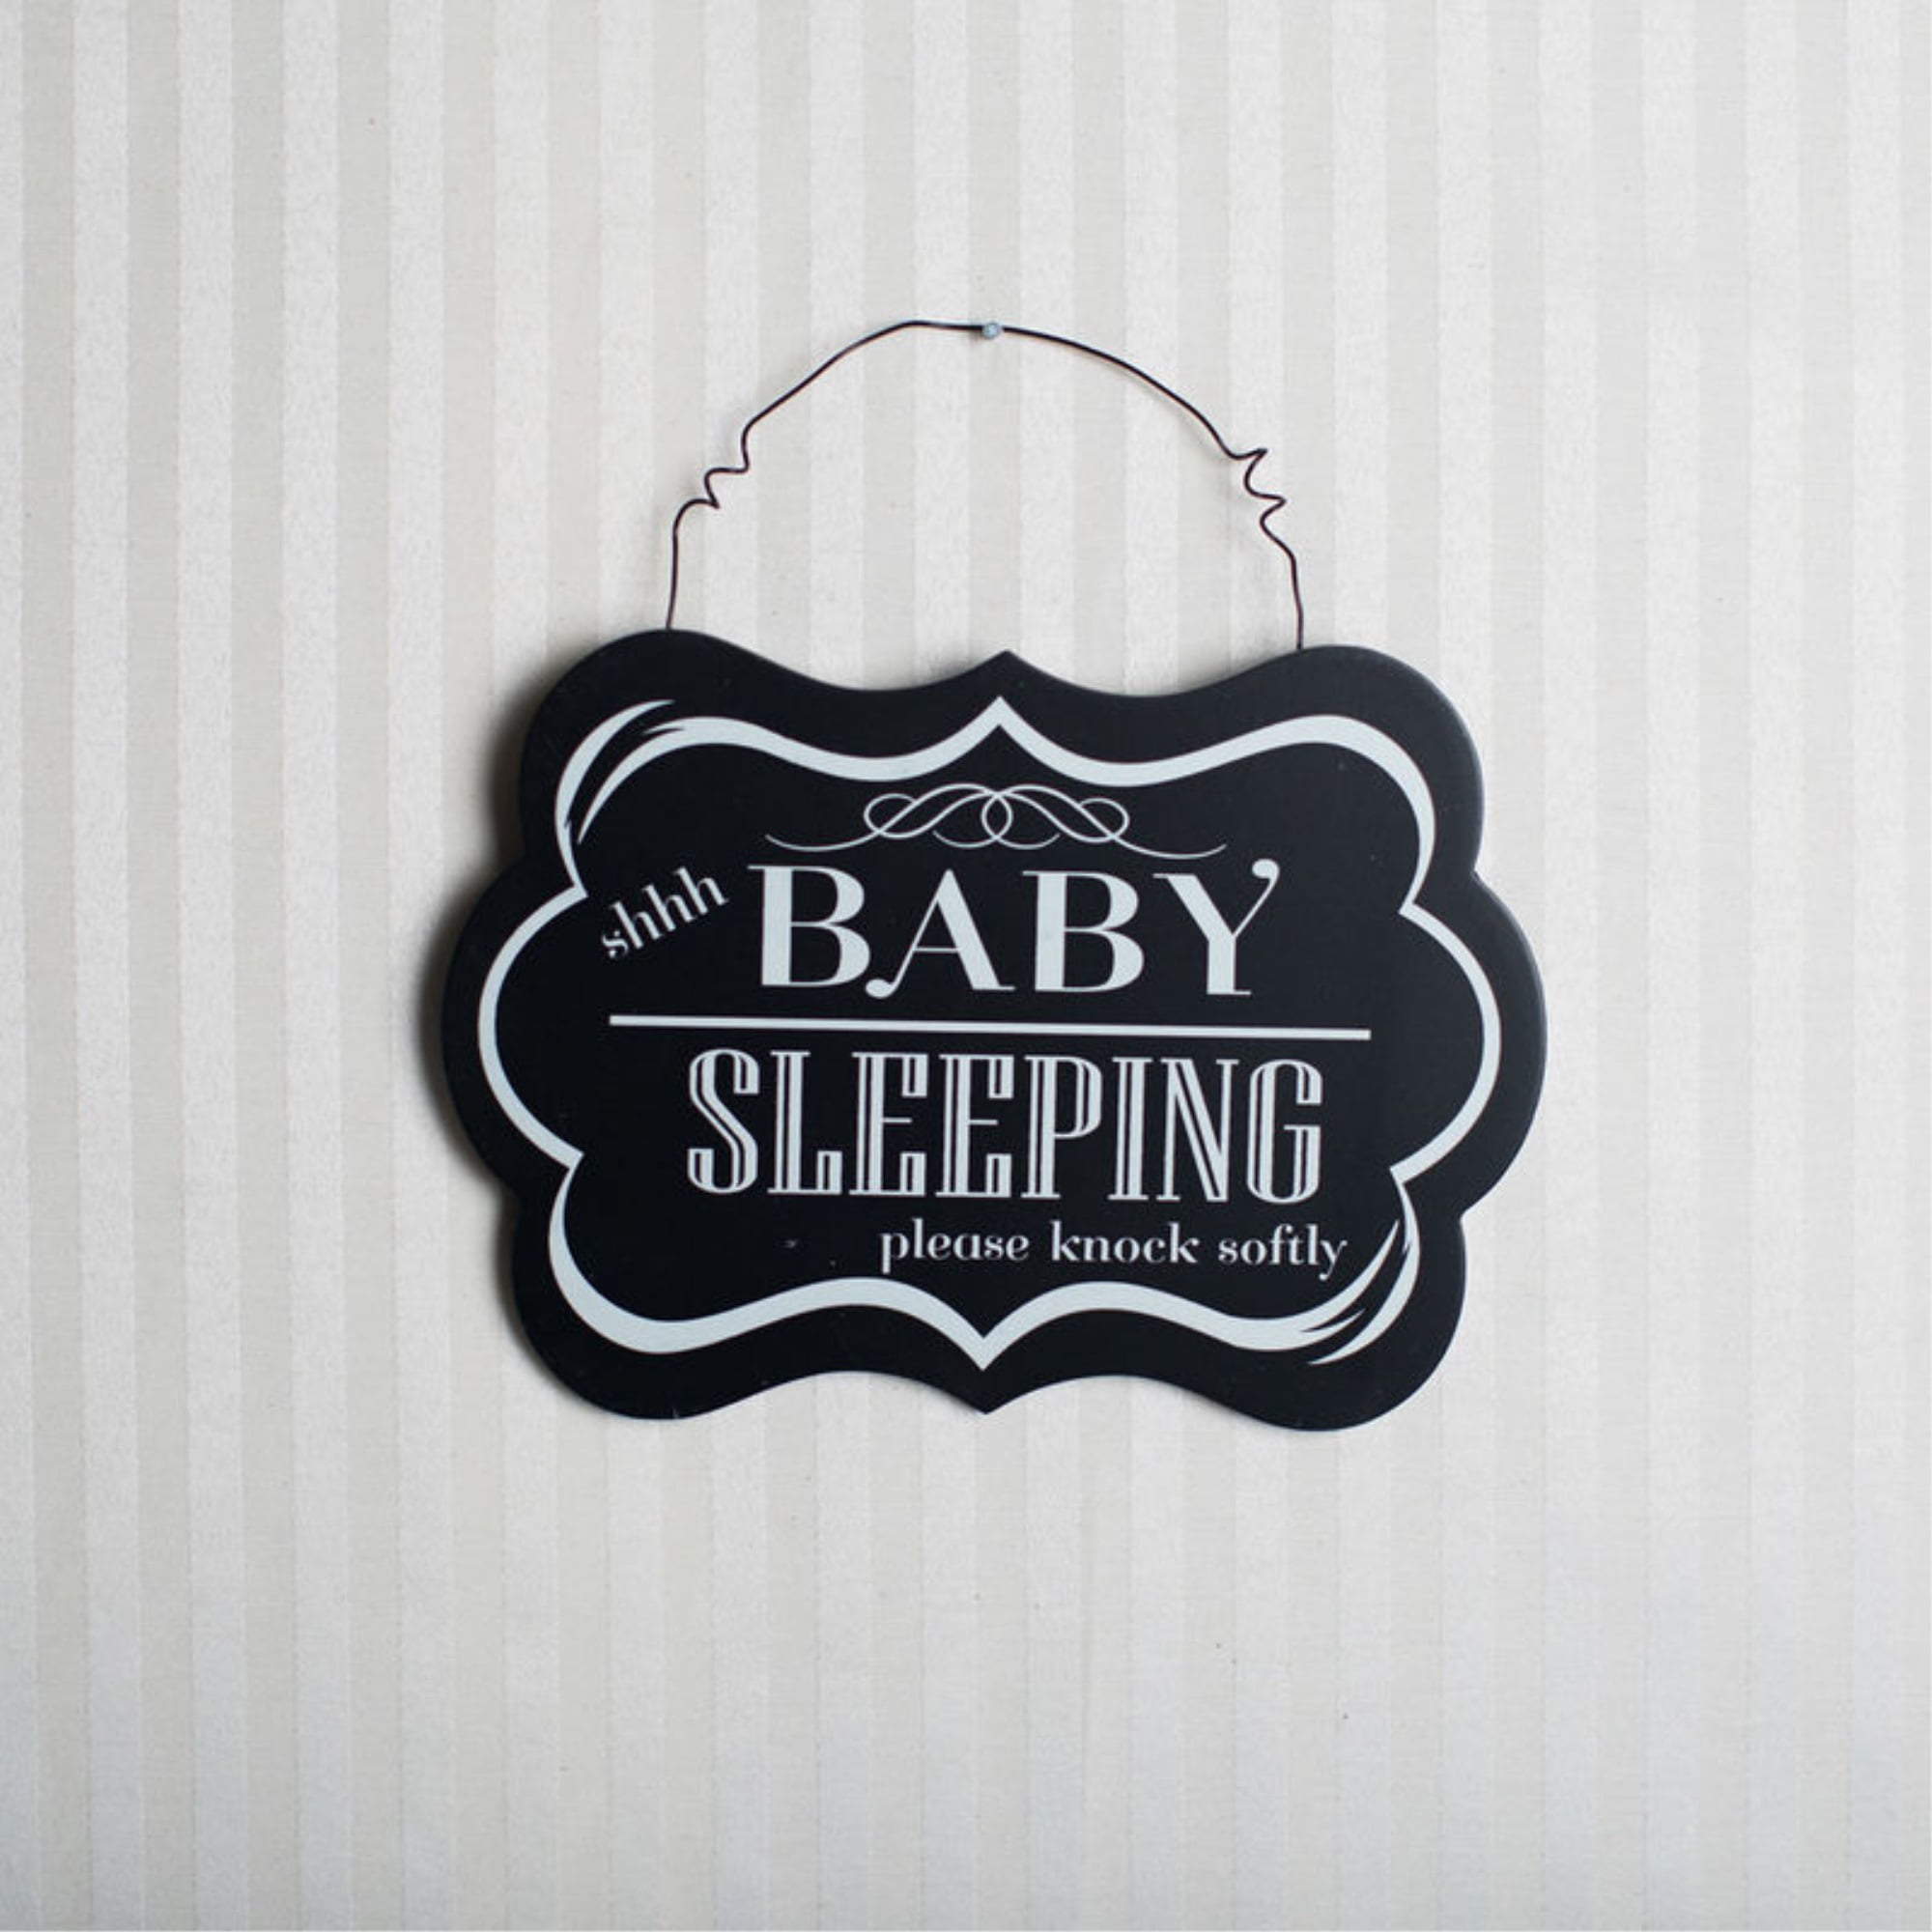 EasyBuying Wall Hanging Ornament Painted Wood Decorative Shhh Baby Sleeping Door Sign Black Decoration For Home Party Supply Style 1